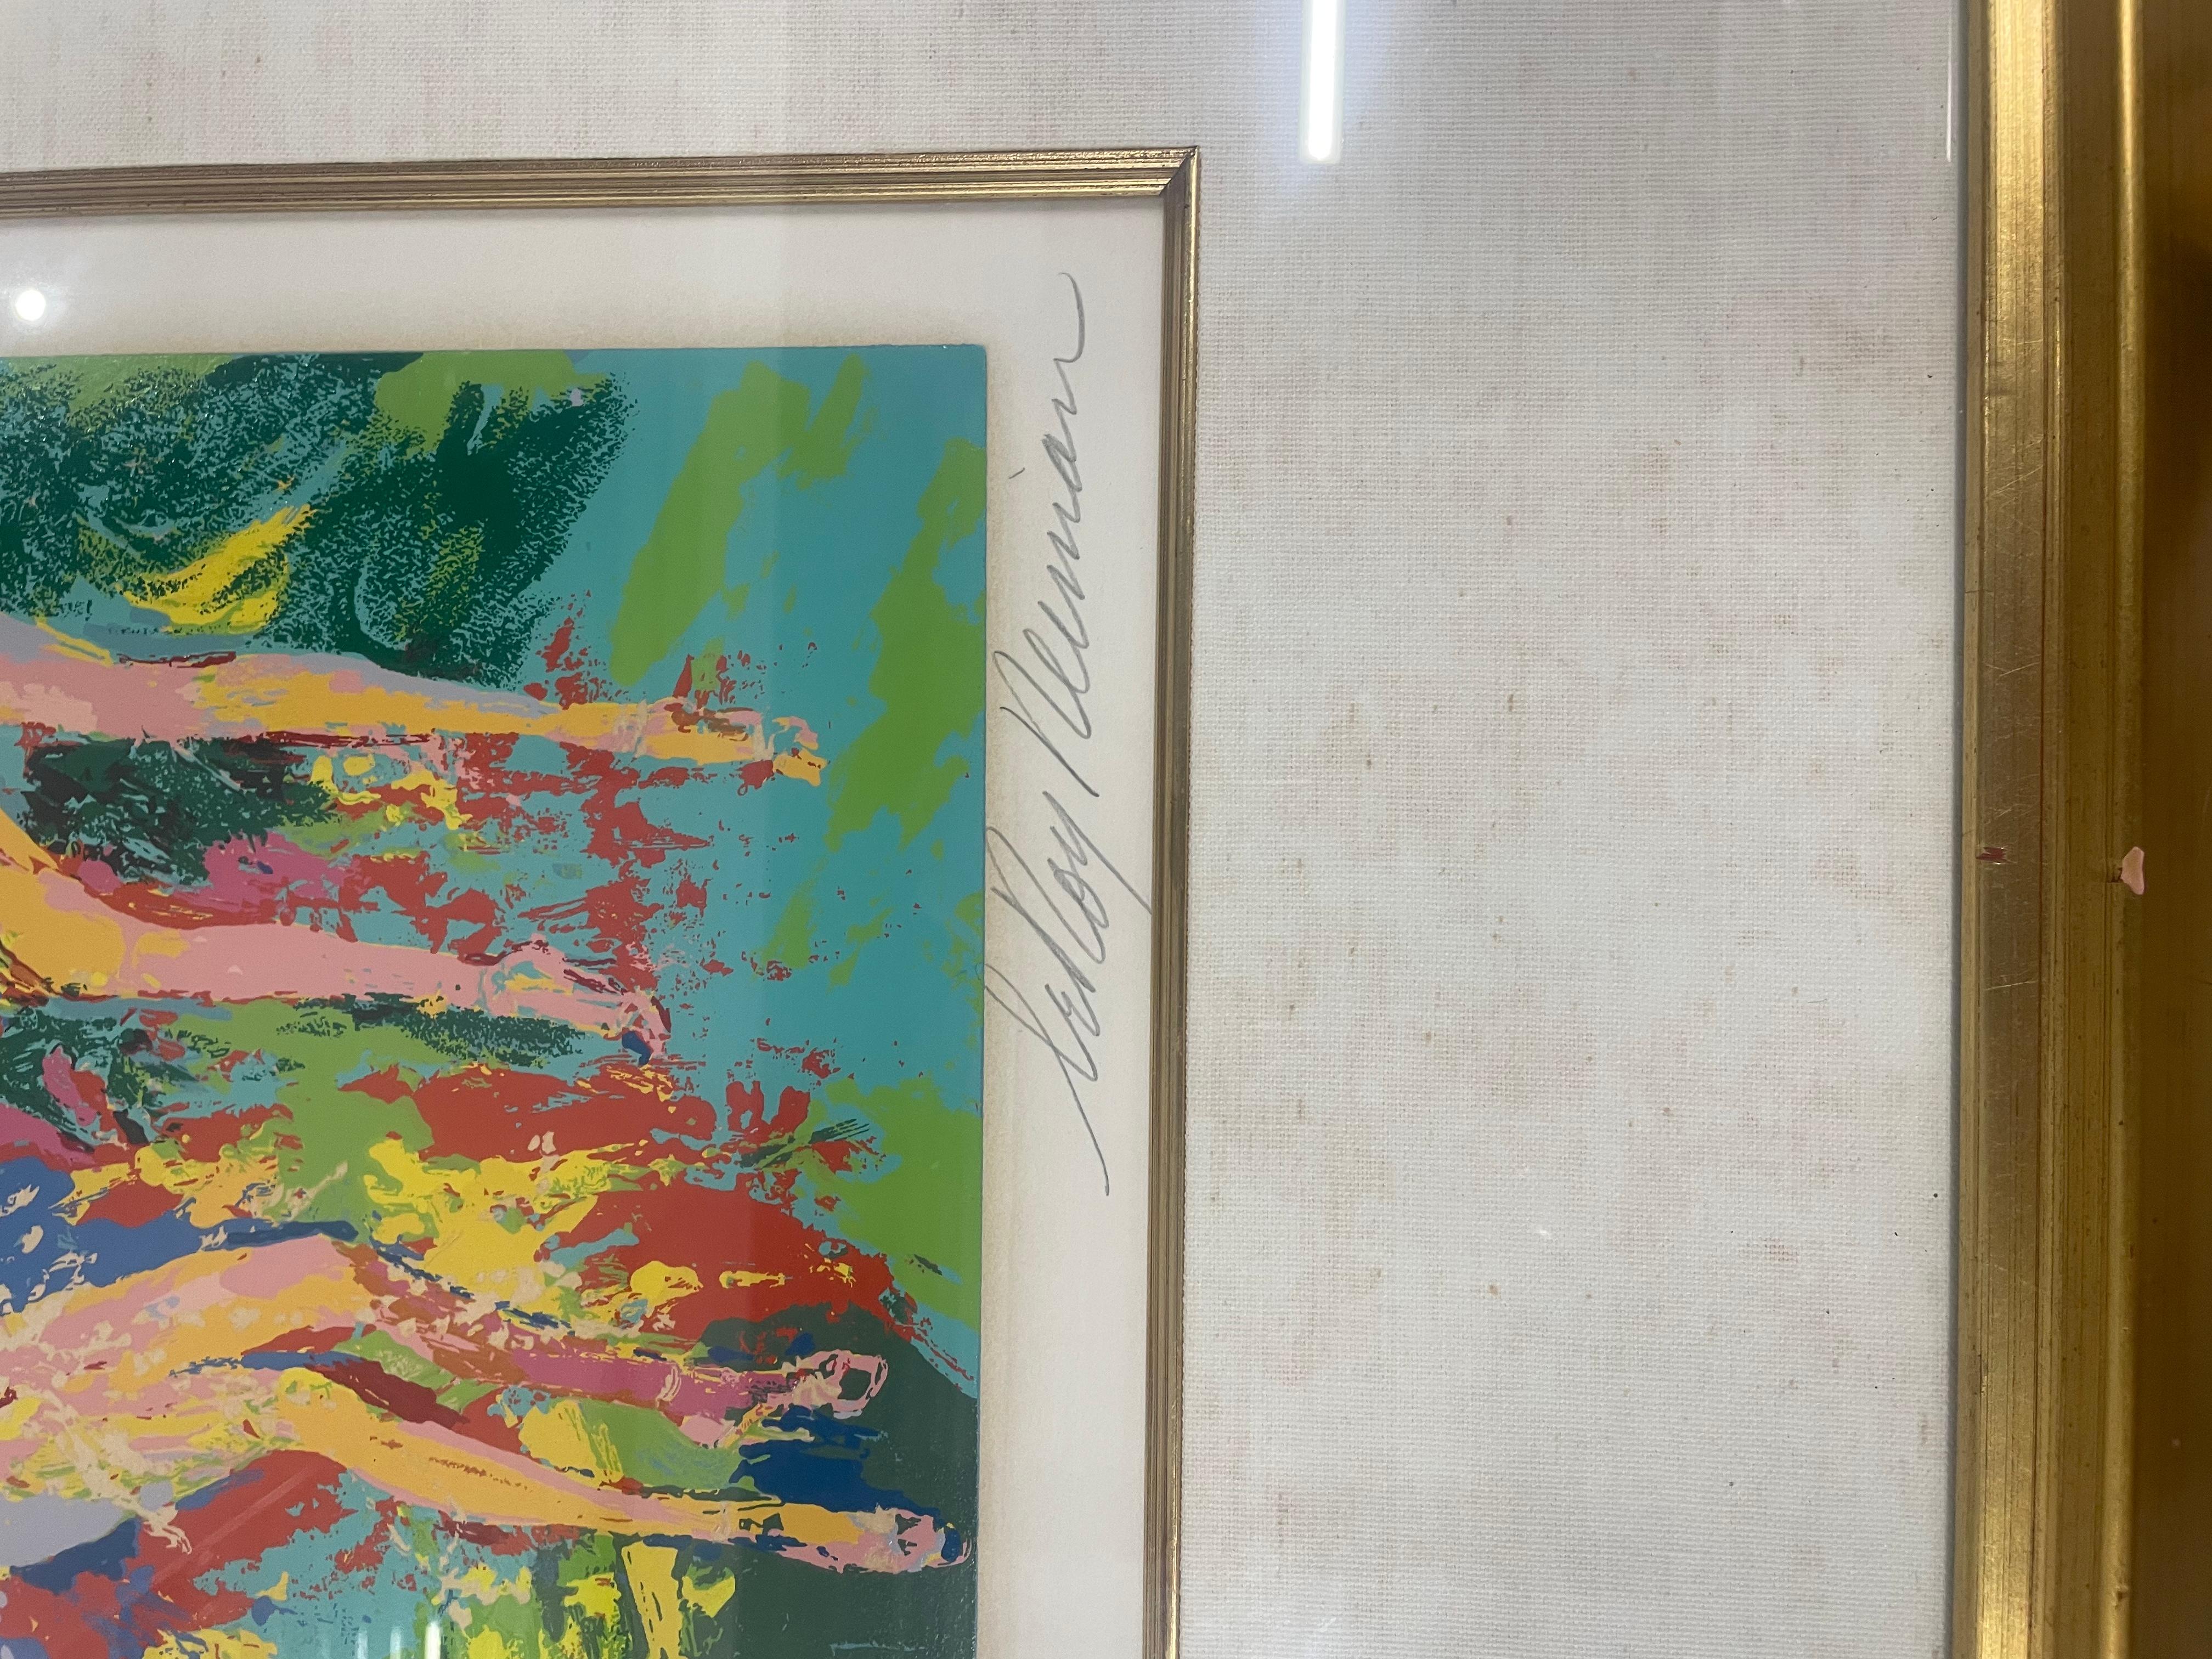 This is an Leroy Neiman Serigraph signed and numbered “Passistas”. In good condition. Could use new matting . Measures 30x26